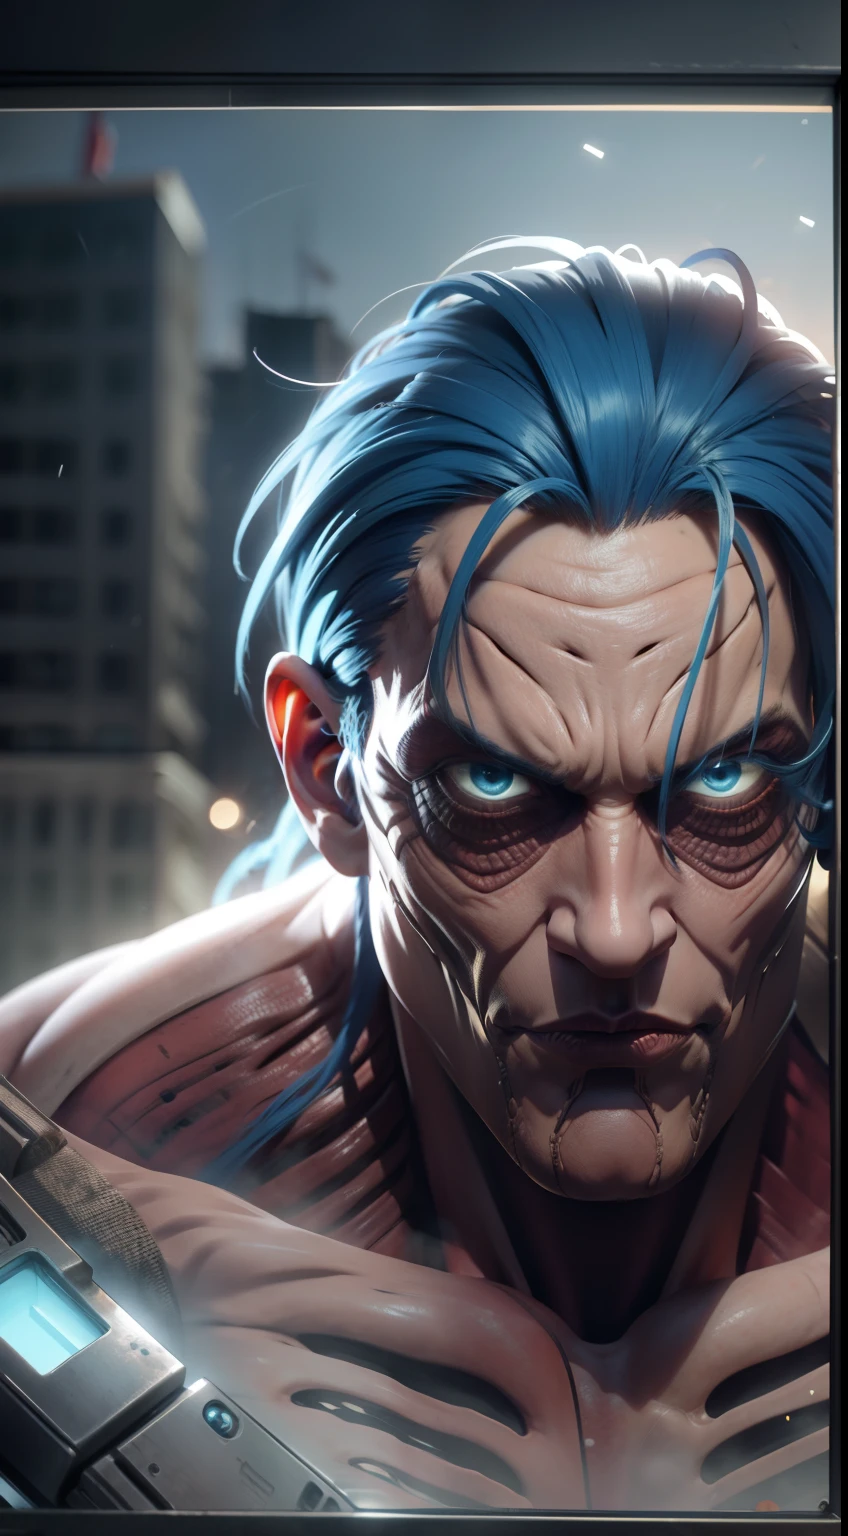 Imagine "Giant Franky" in "Attack on Titan": his mechanical prowess shines as he zooms in. Towering with his cyborg form and weird blue hair with looks, Franky's boisterous demeanor and distinctive physique remain. A hulking engineer, he navigates the chaos with his arsenal of gadgets.extremely detailed, ultra hd, hdr, 8k, cinematic, dramatic lighting ray tracing reflections